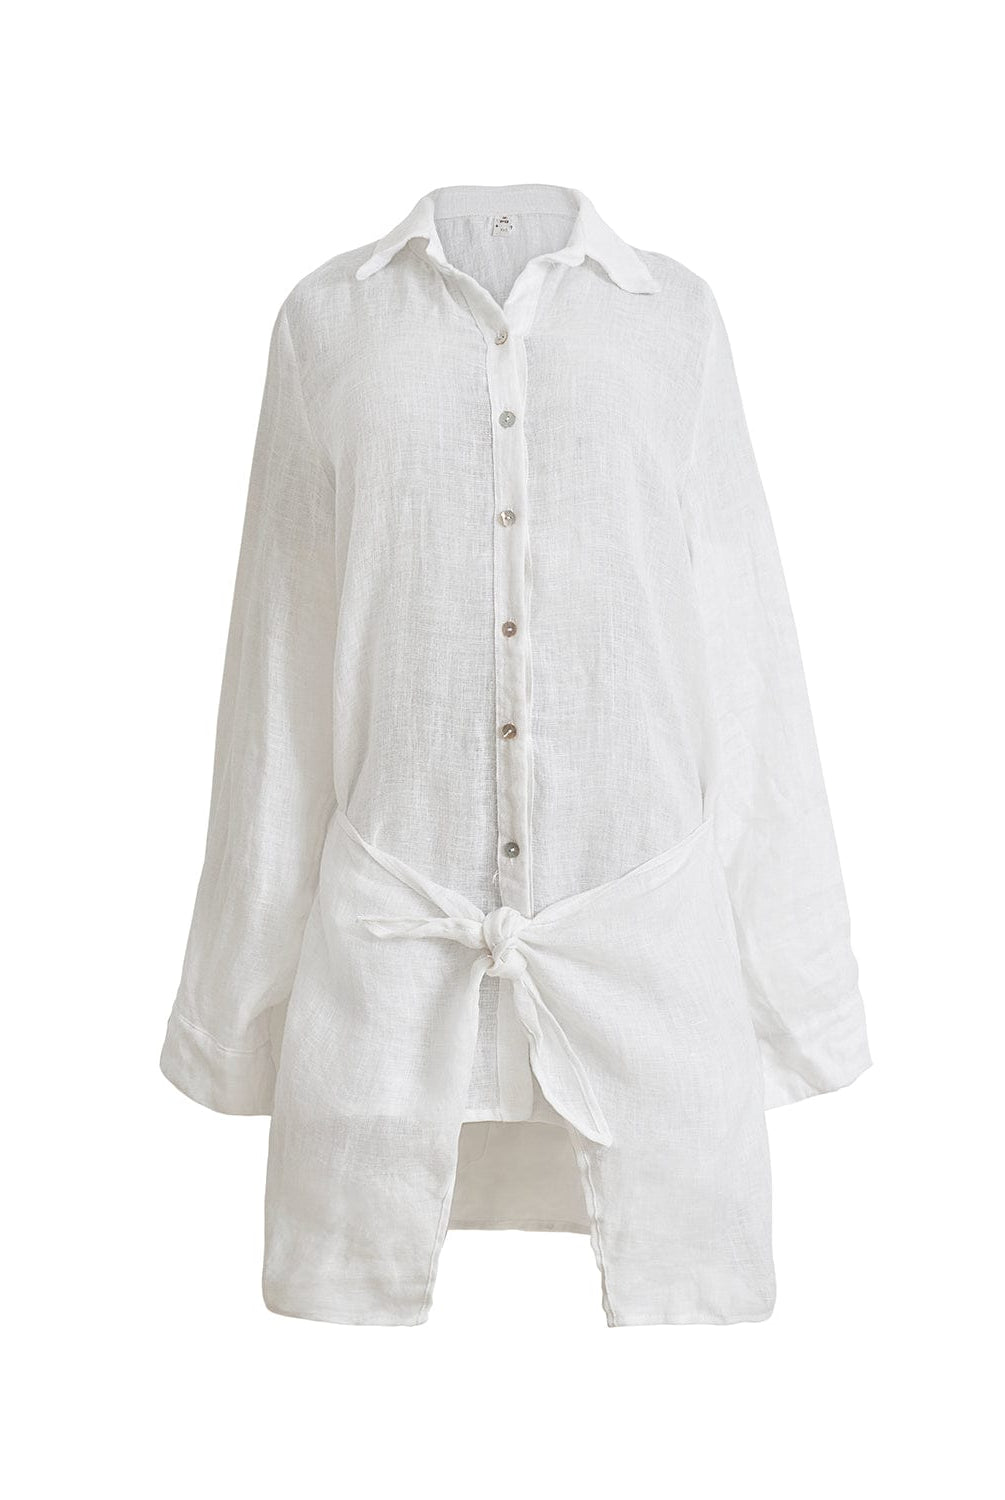 A lightweight white linen button coverup with front-tie detail. Featured against a white wall background.